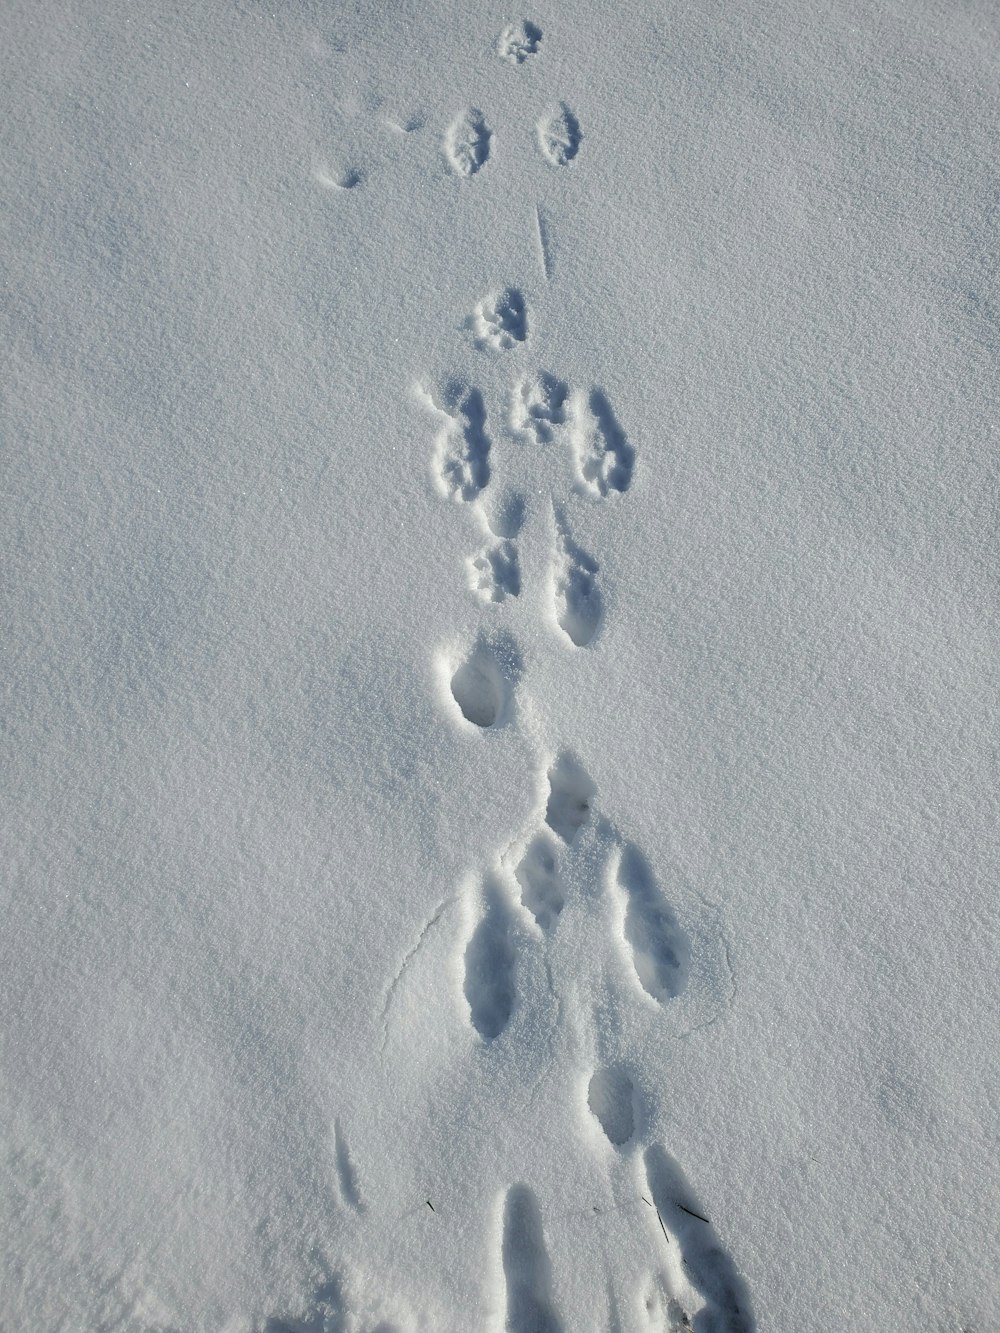 a person is walking in the snow with footprints